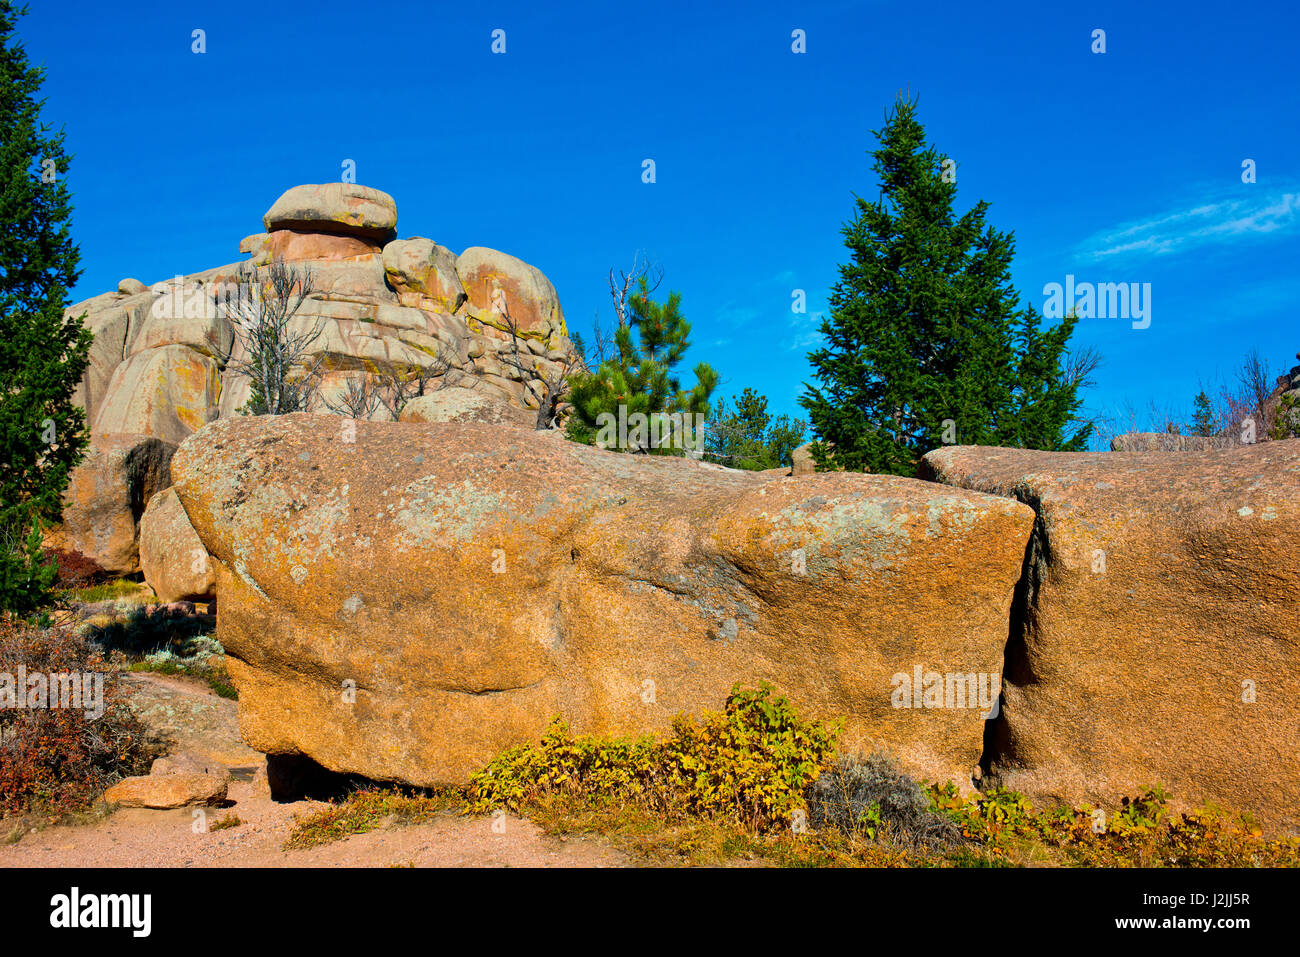 USA Wyoming Buford Vedauwoo Recreation Area Unique Rock Formations Of Sherman Granite